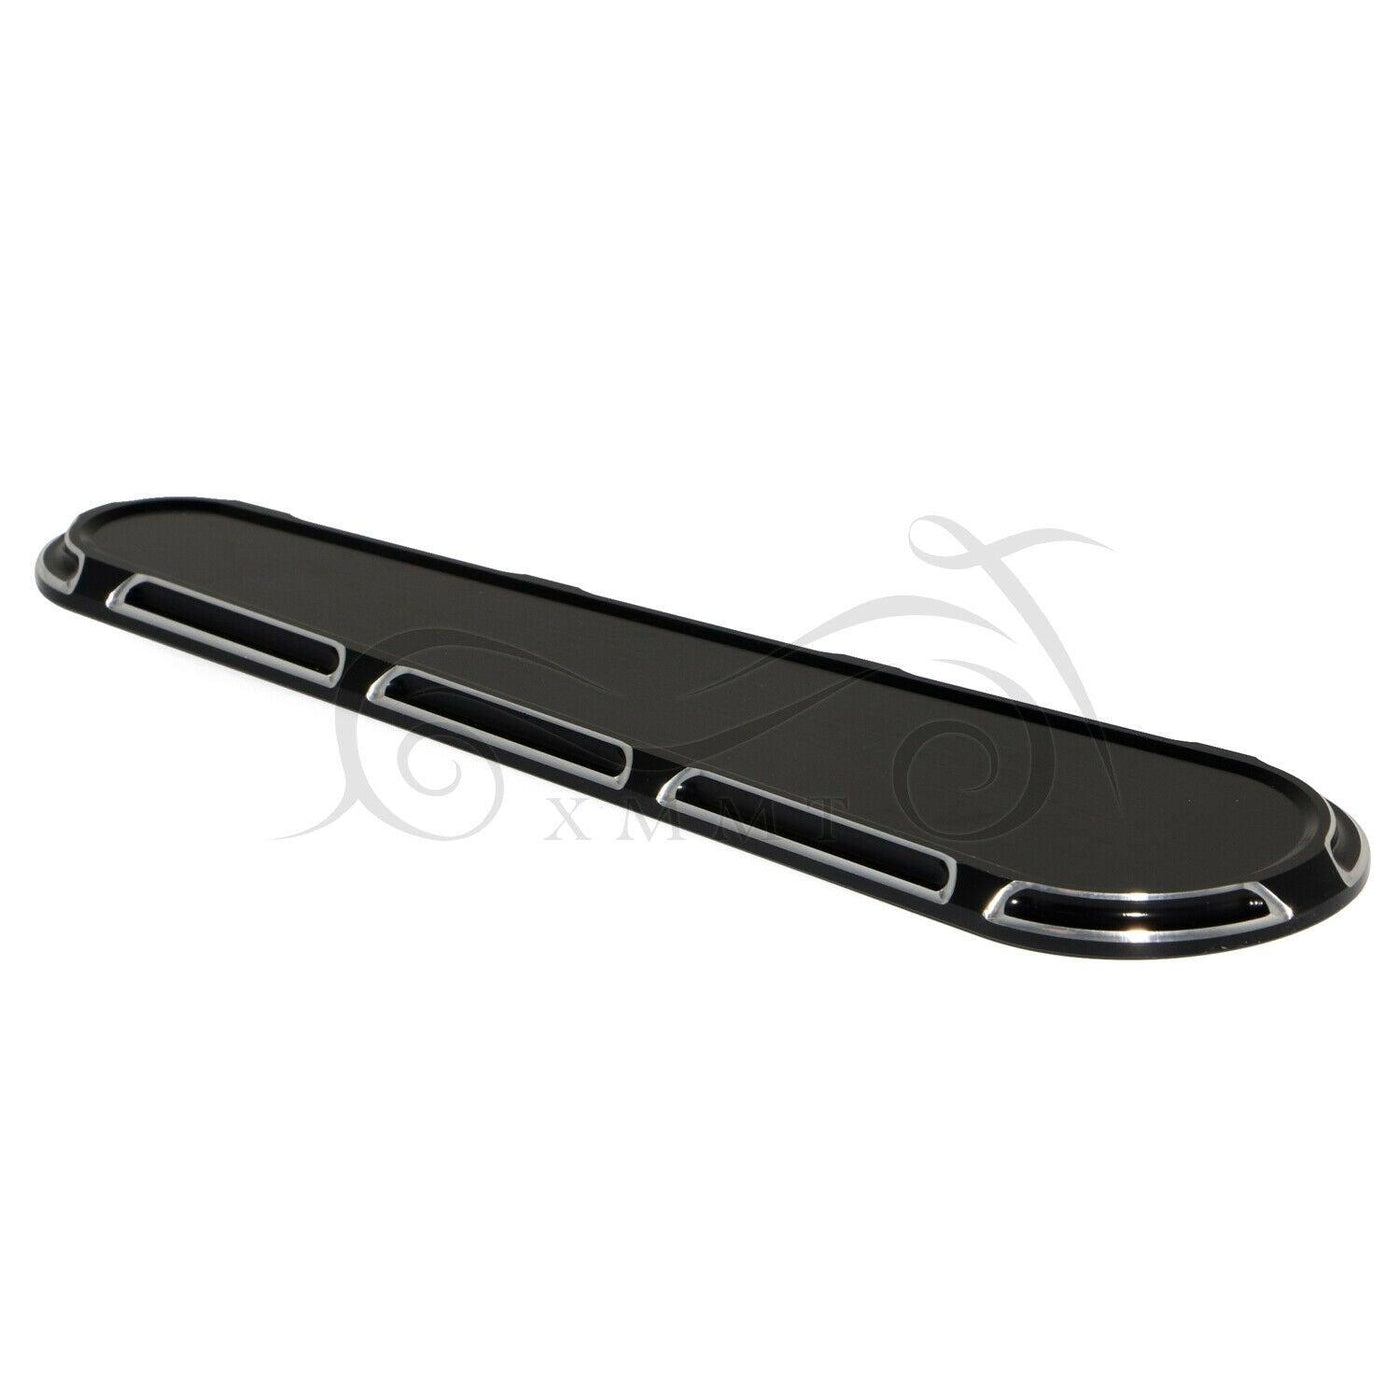 Black Cut Custom Front Dash Insert Cover For Harley Electra Glide Ultra Classic - Moto Life Products